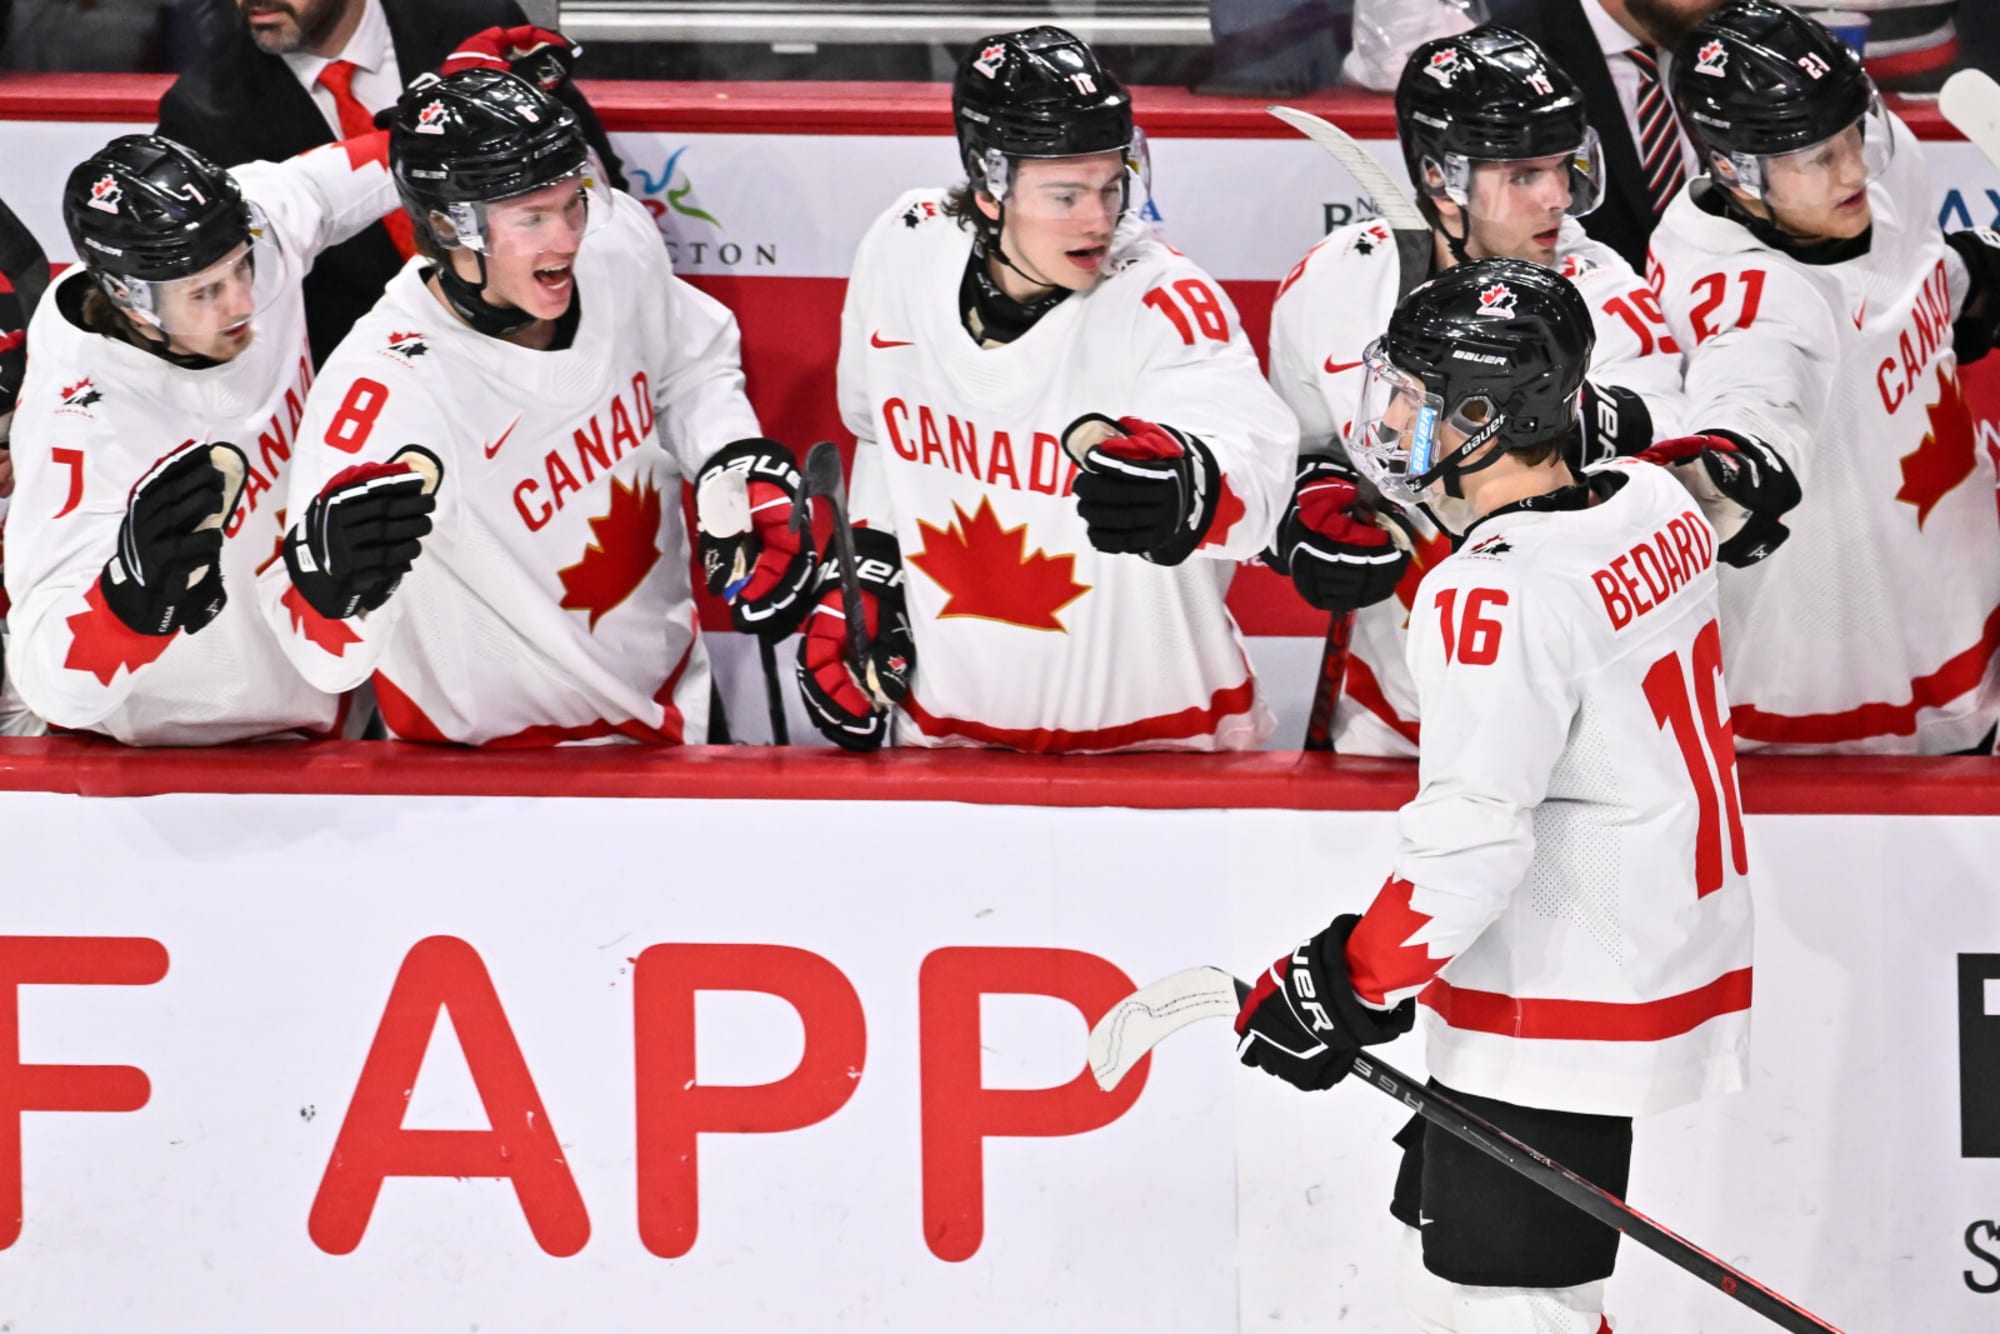 2021 WJC Notebook: A Gold Medal Finish